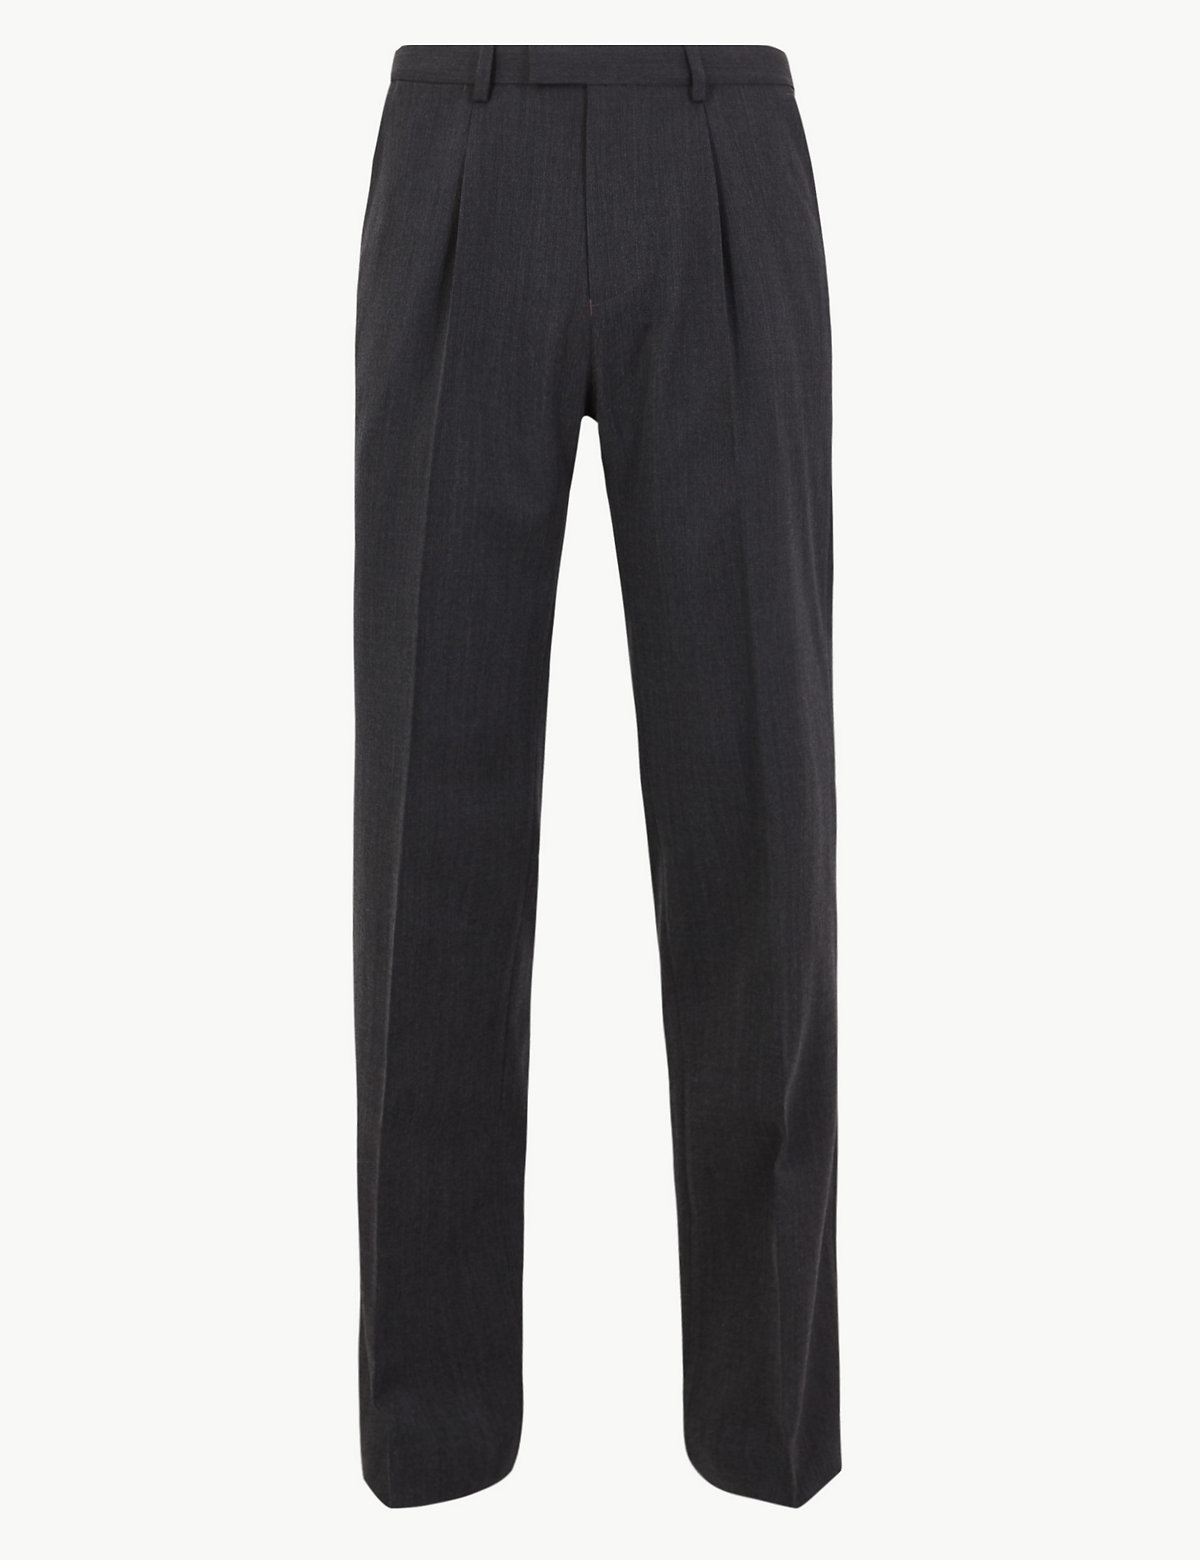 Regular Fit Wool Blend Stretch Trousers